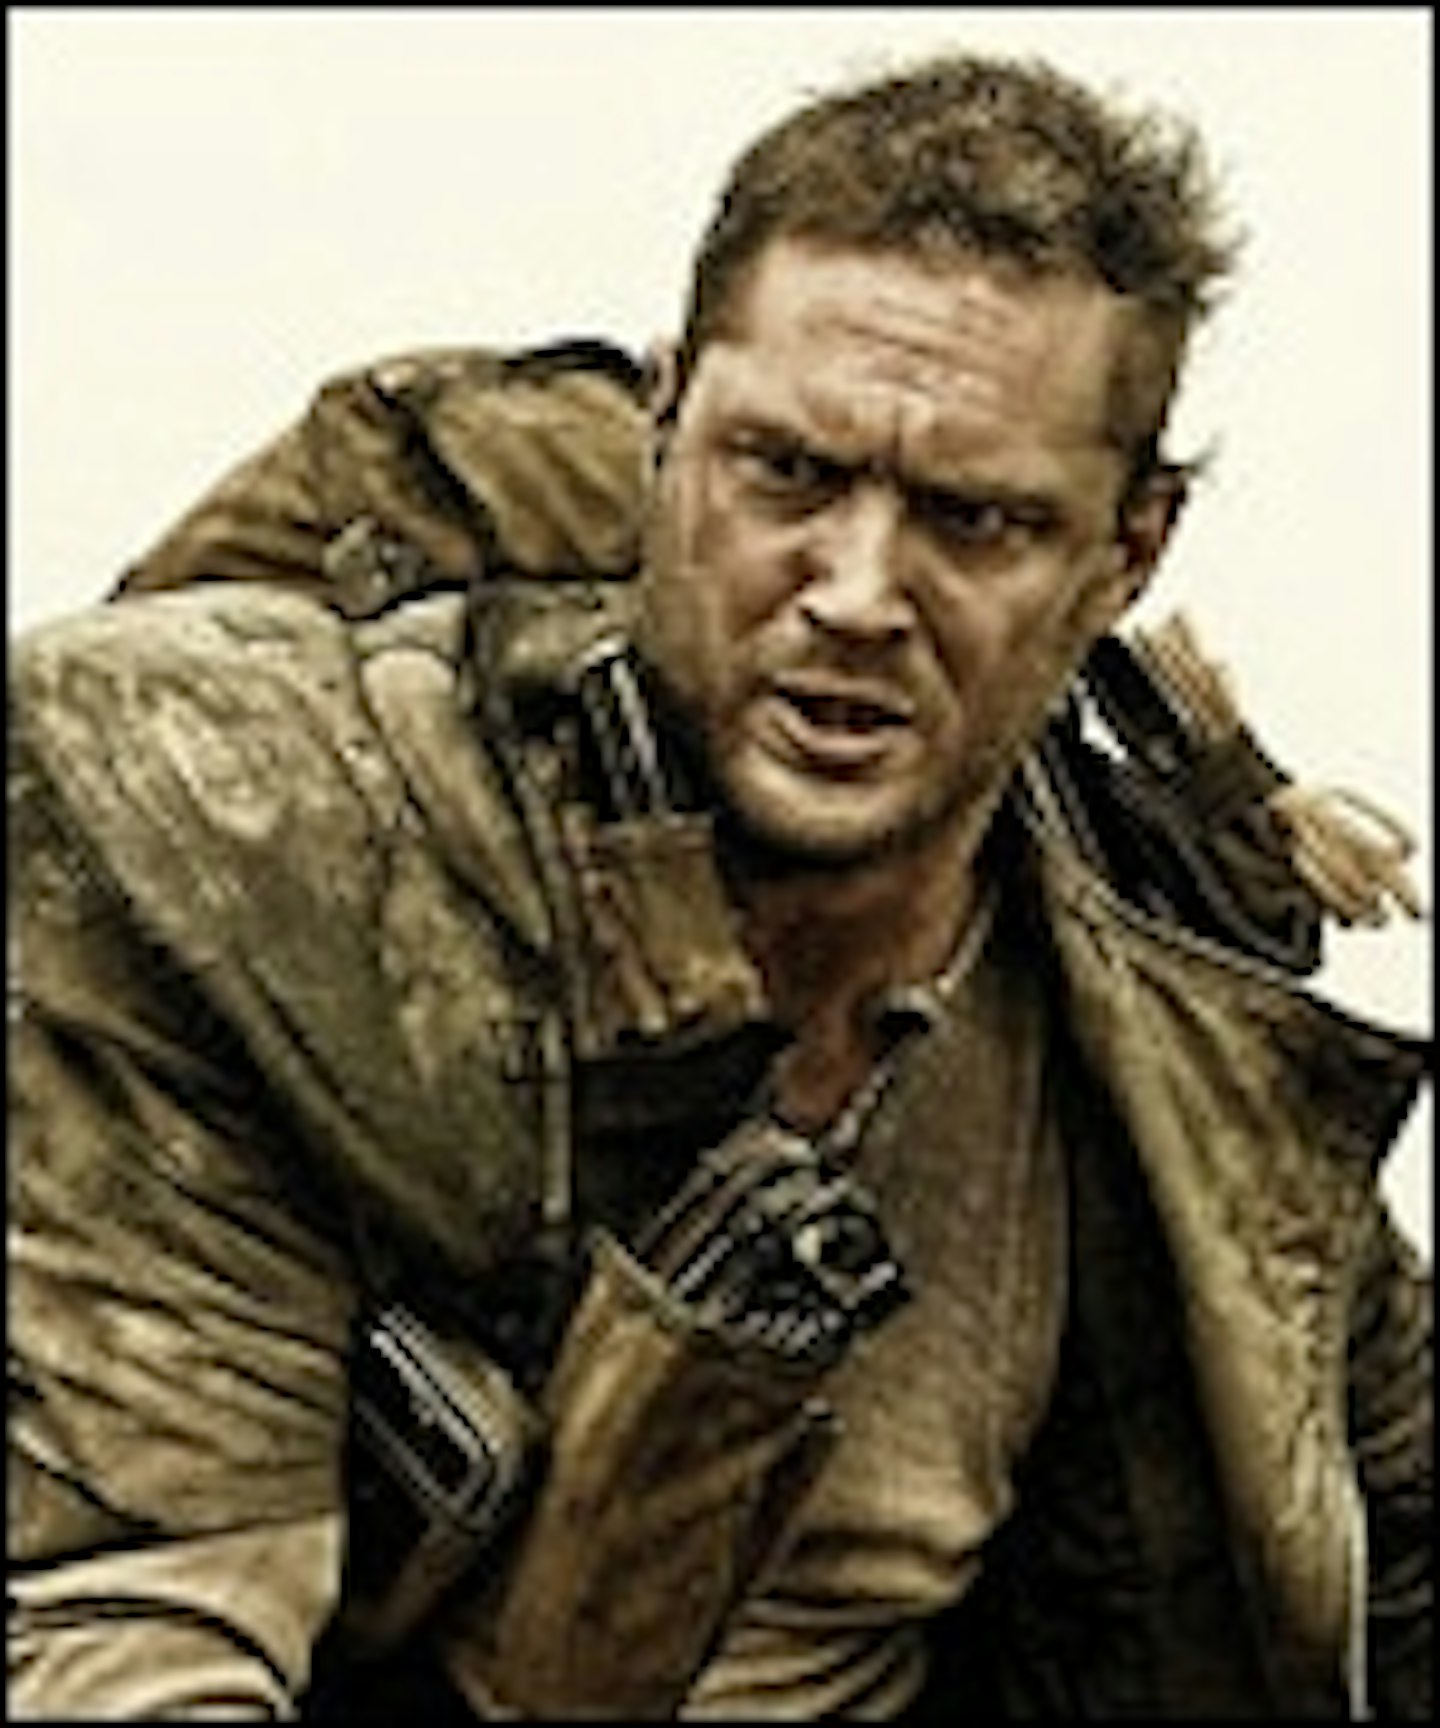 New Mad Max: Fury Road Trailer Arrives Online